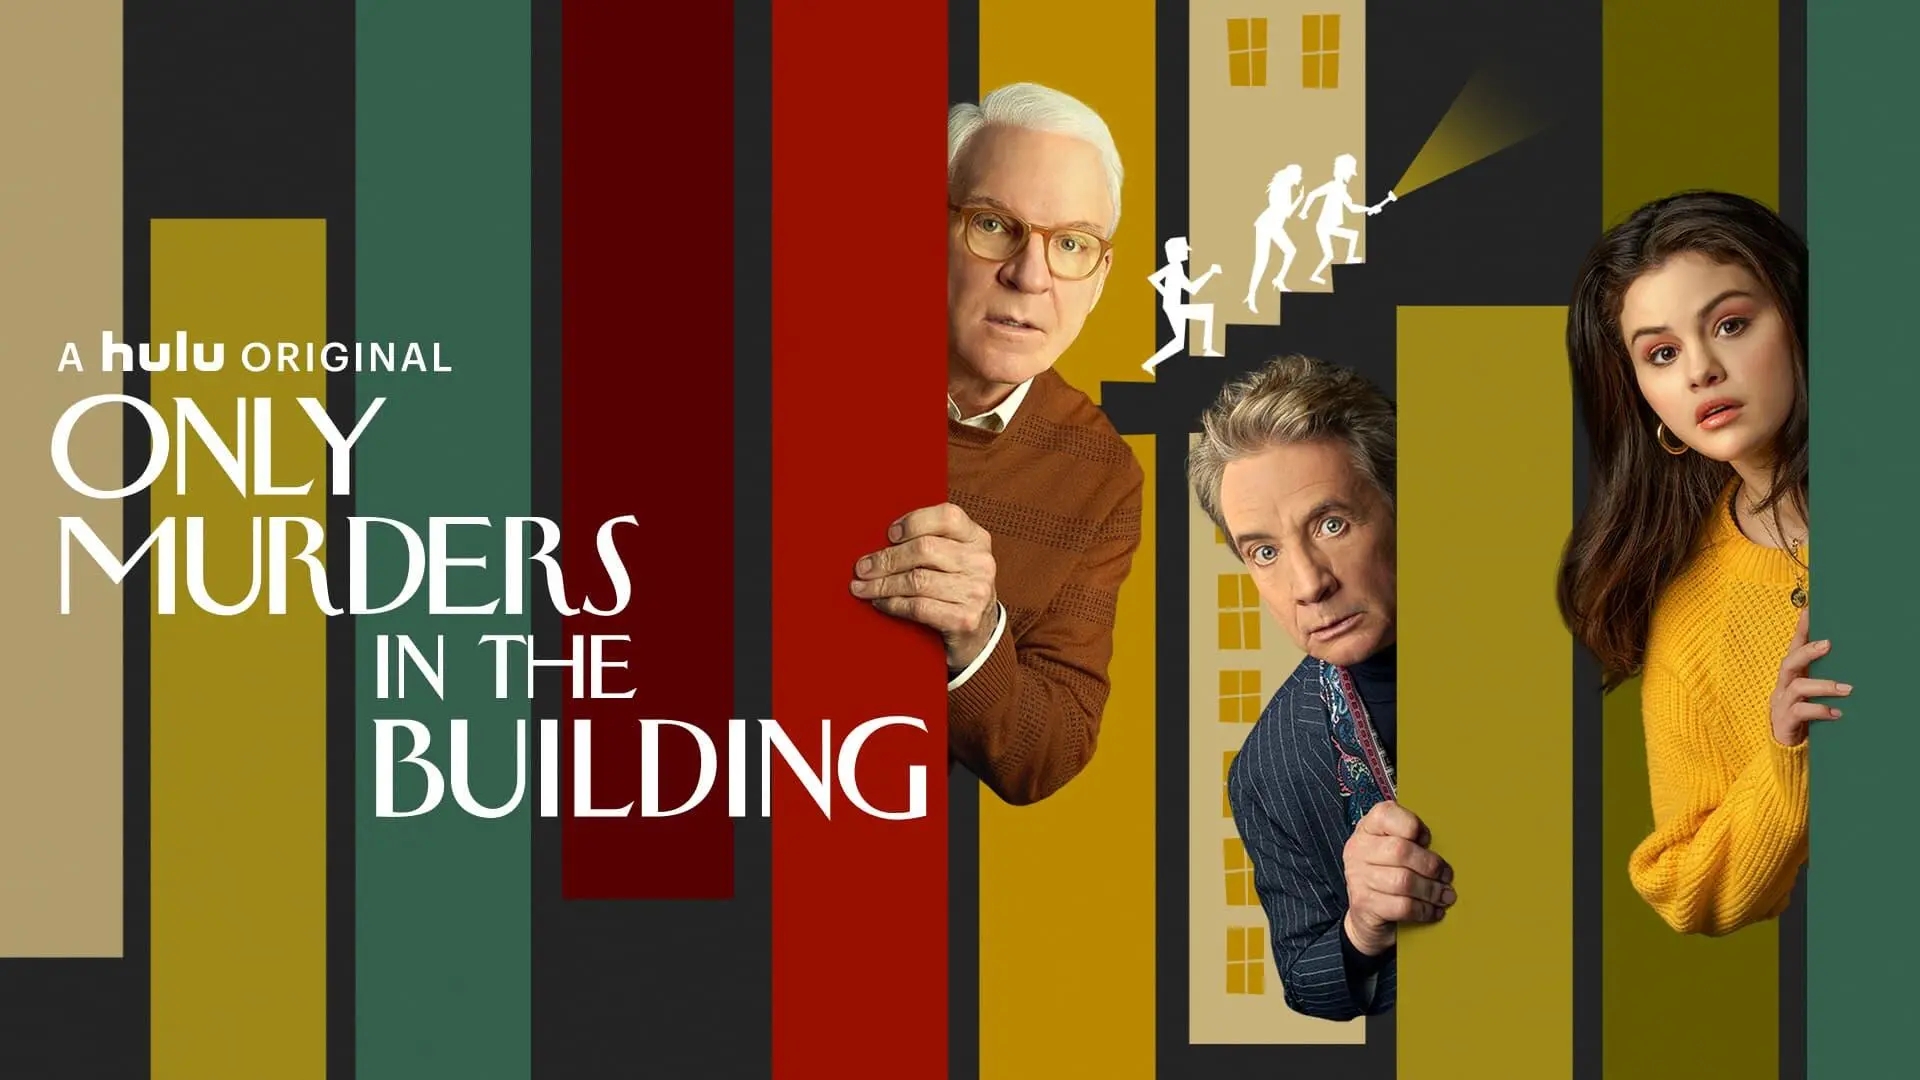 Title art for the Emmy nominated Hulu Original show Only Murders in the Building